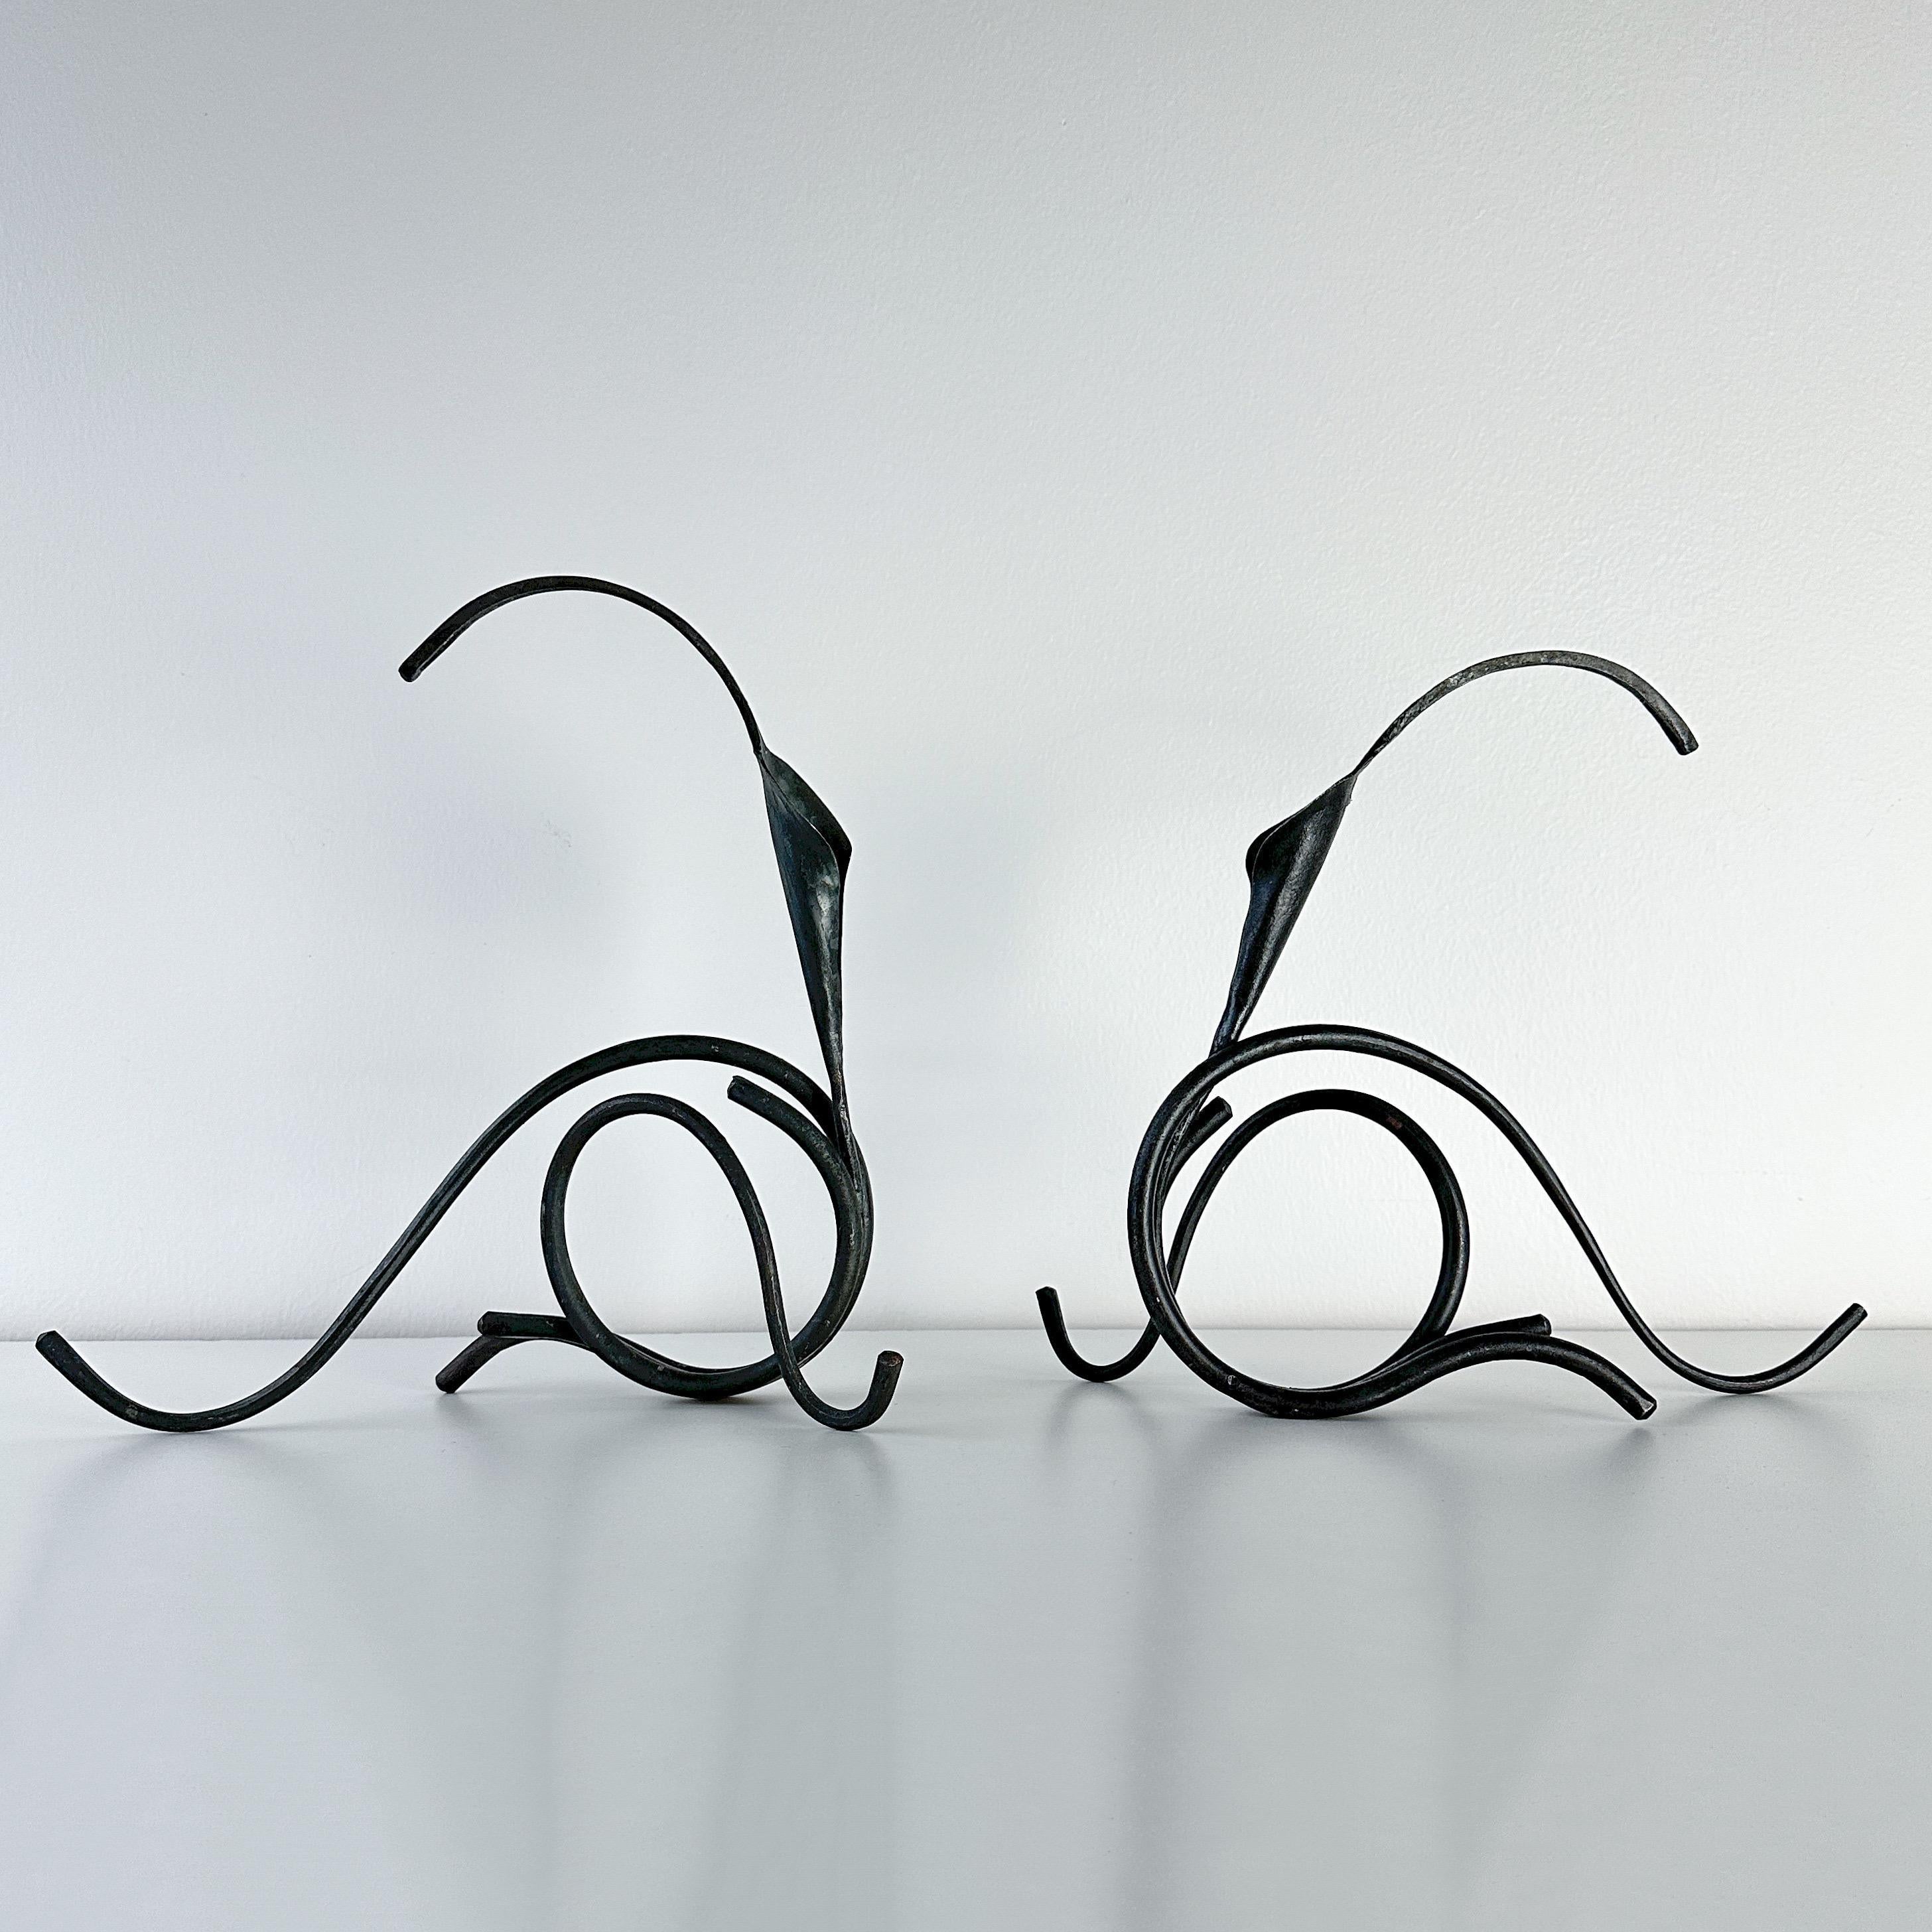 Vintage pair circa 1980s of sculptural hand forged iron candle holders in the shape of calla lillies by 20th century brutalist artist Jack Brubaker. Each sculpture piece holds a taper and is signed J. Brubaker. Dimensions listed are for each piece.